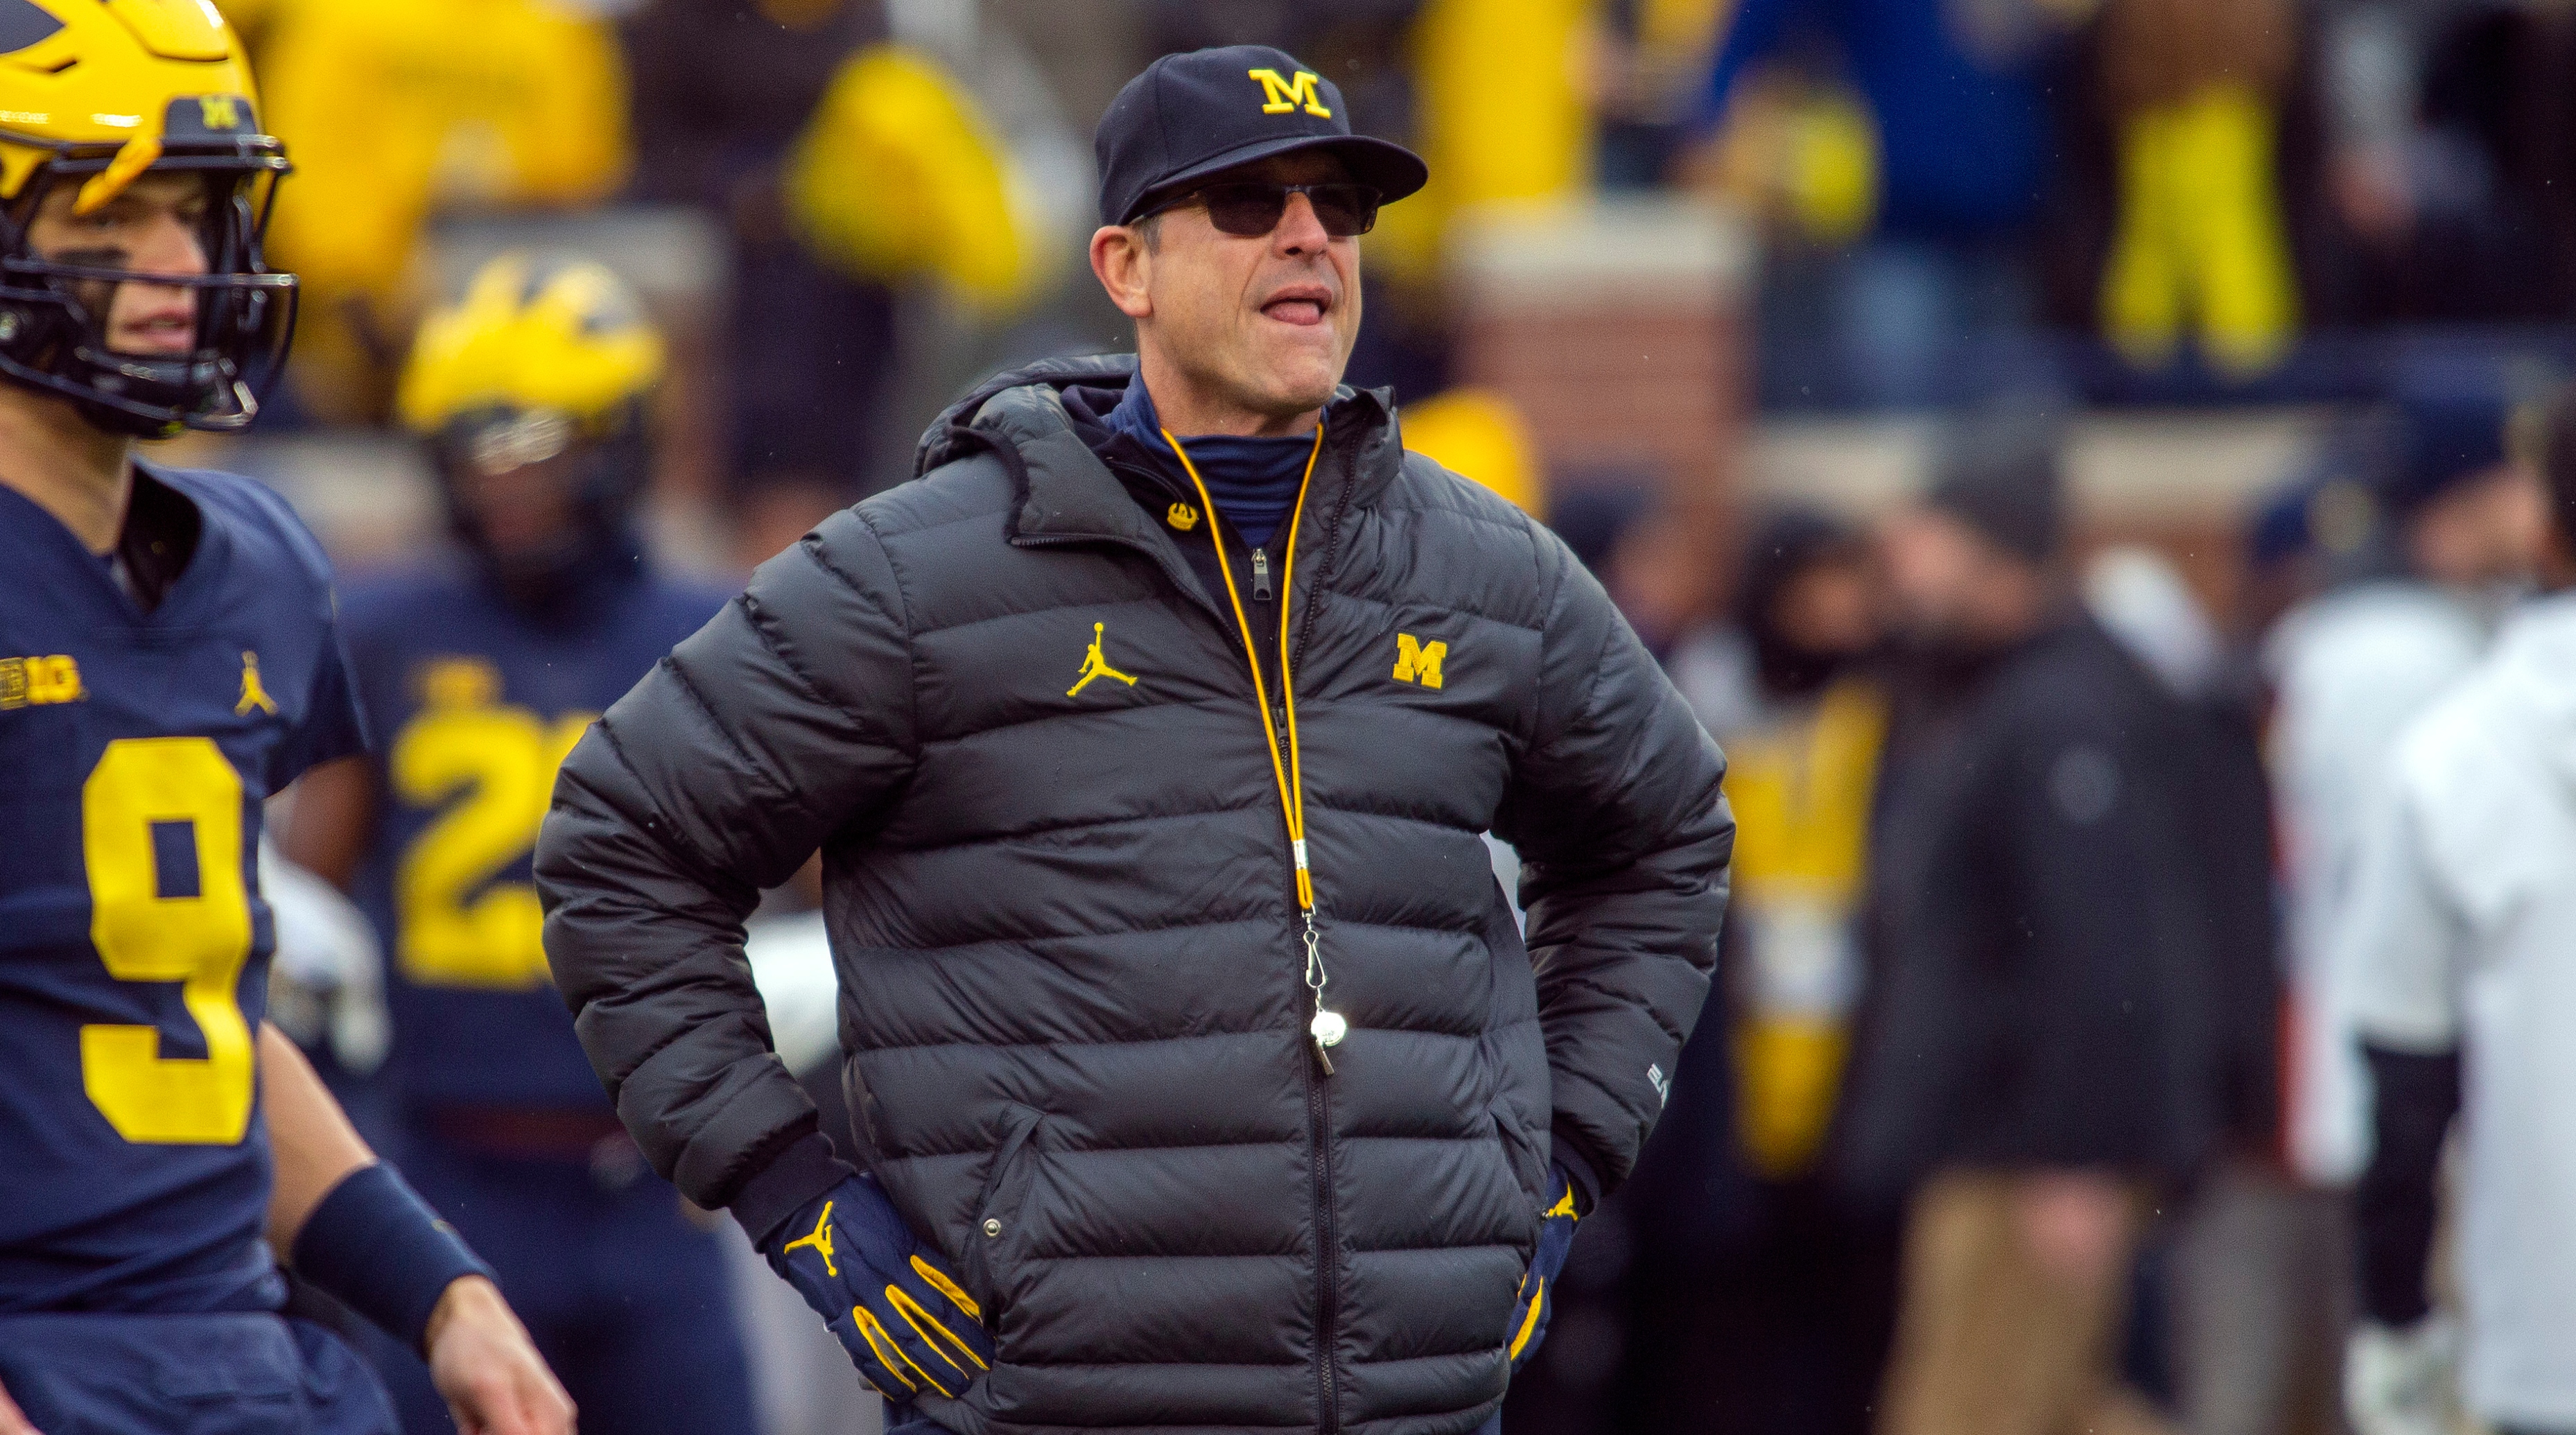 Michigan football coach Jim Harbaugh stands with his hands on his hips while on the sideline during a game against Ohio State.